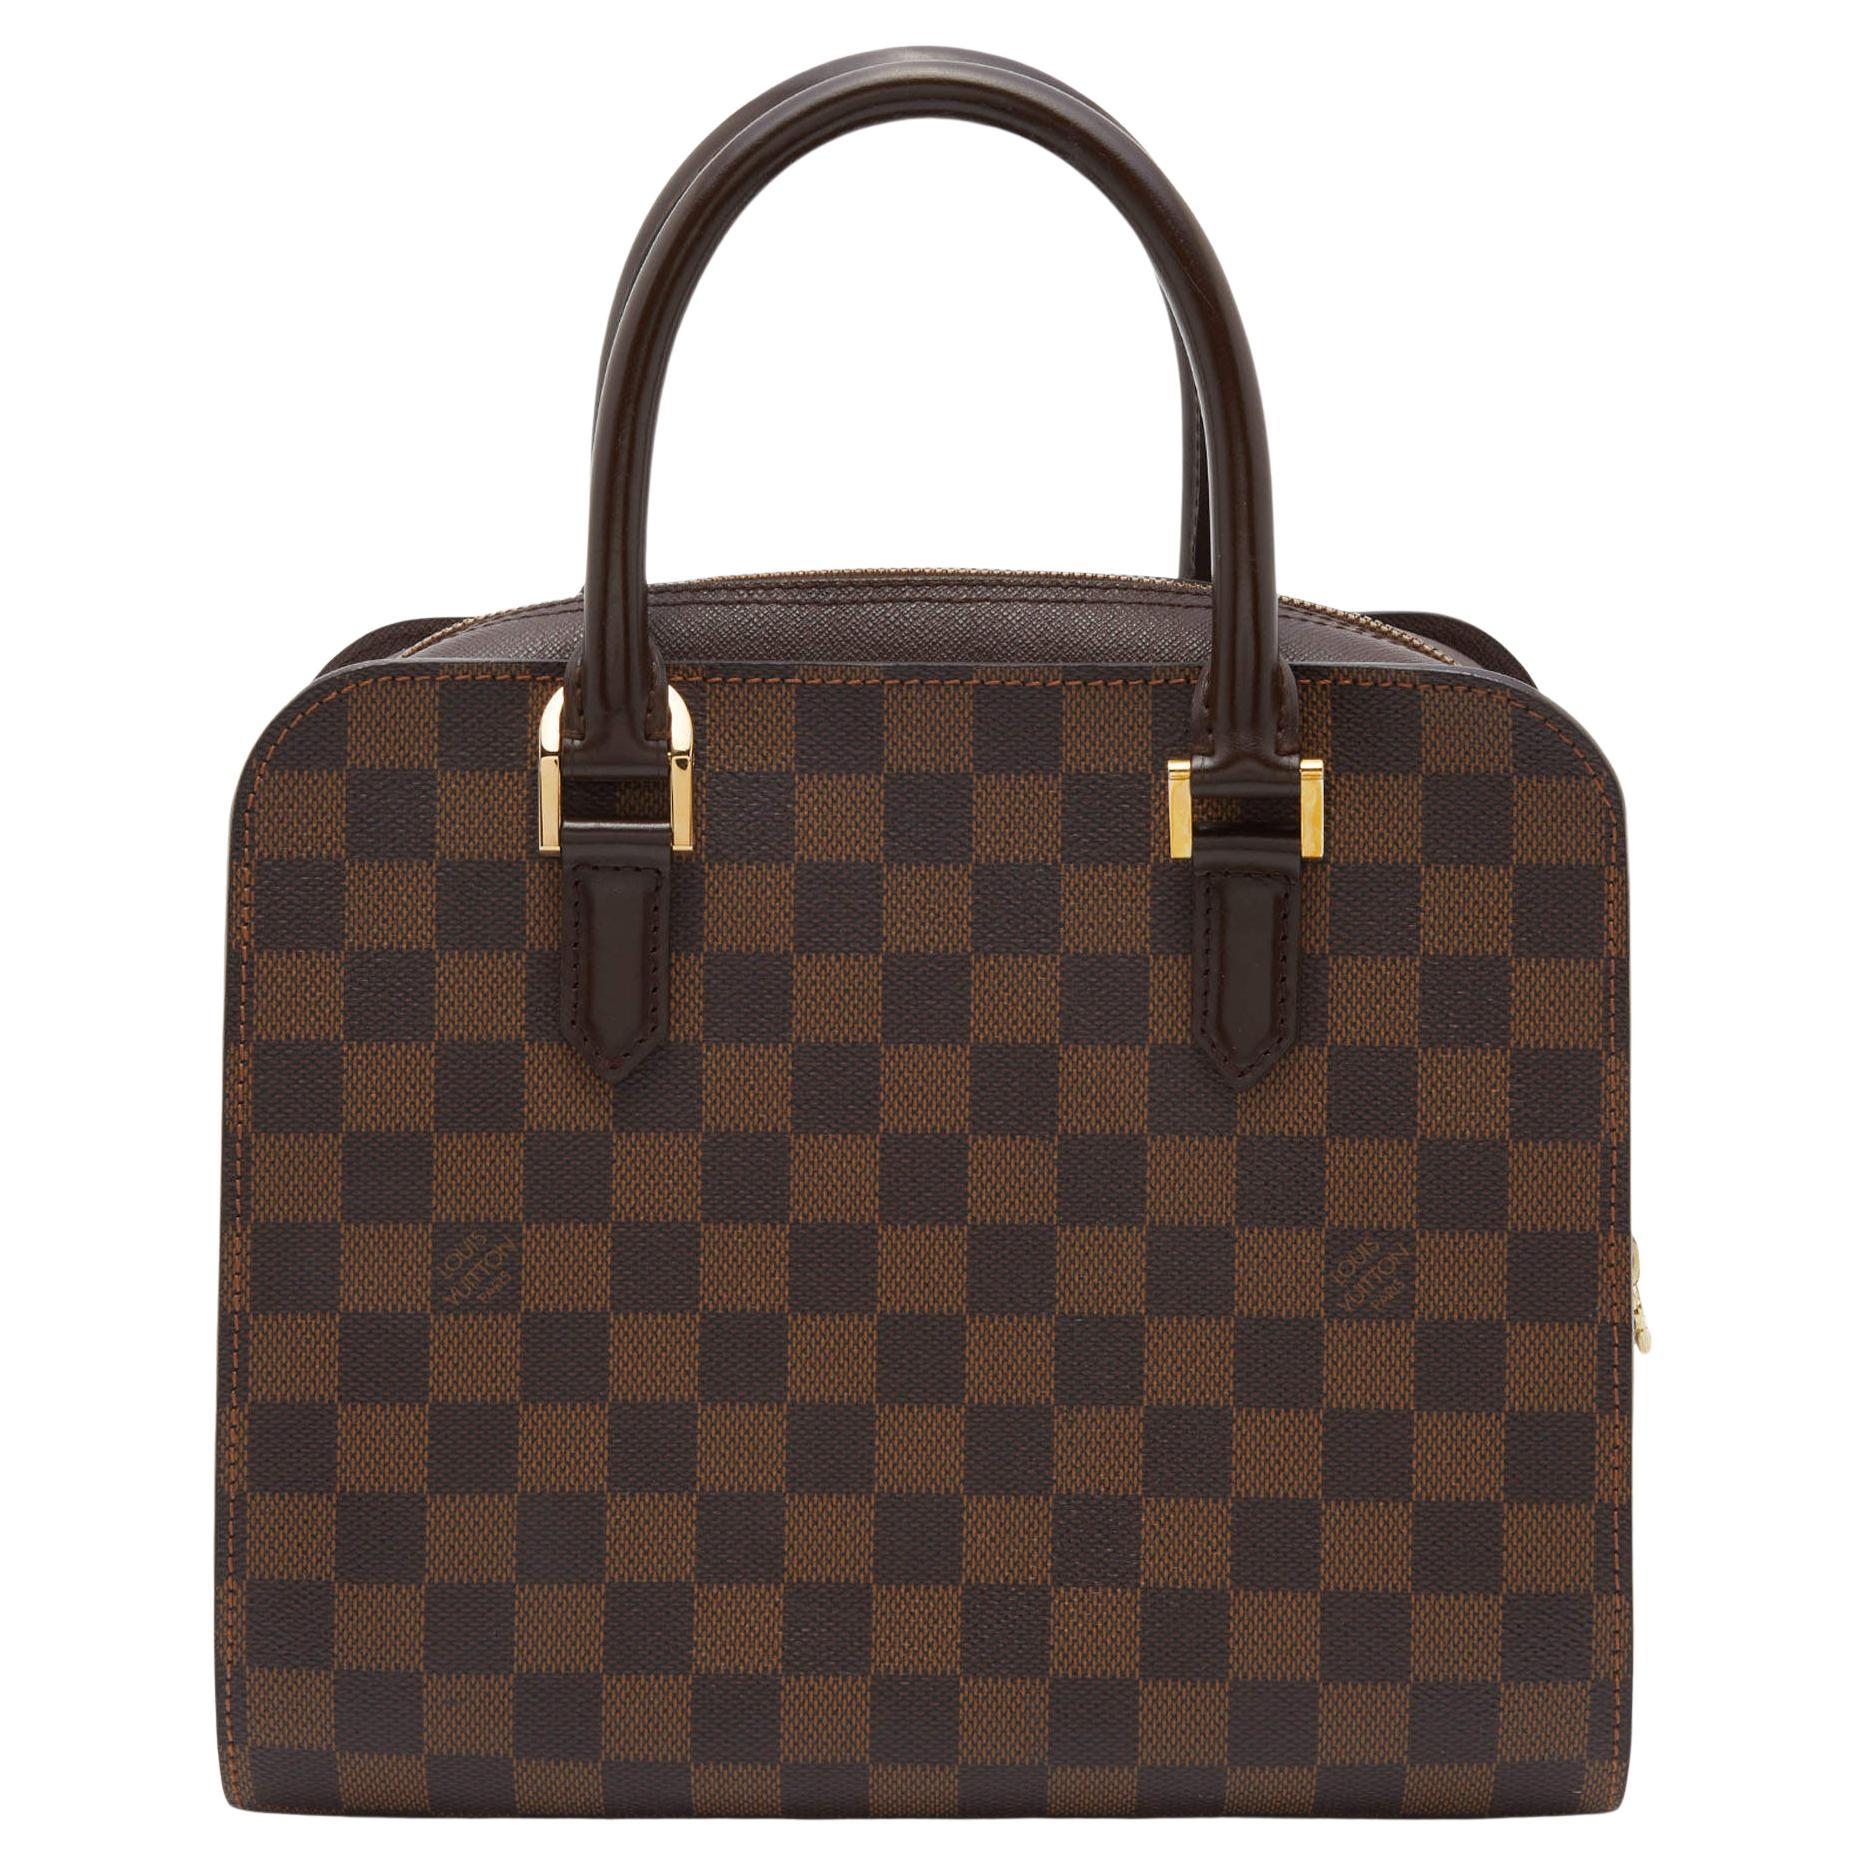 Louis Vuitton Damier Ebene Canvas and Leather Triana Bag